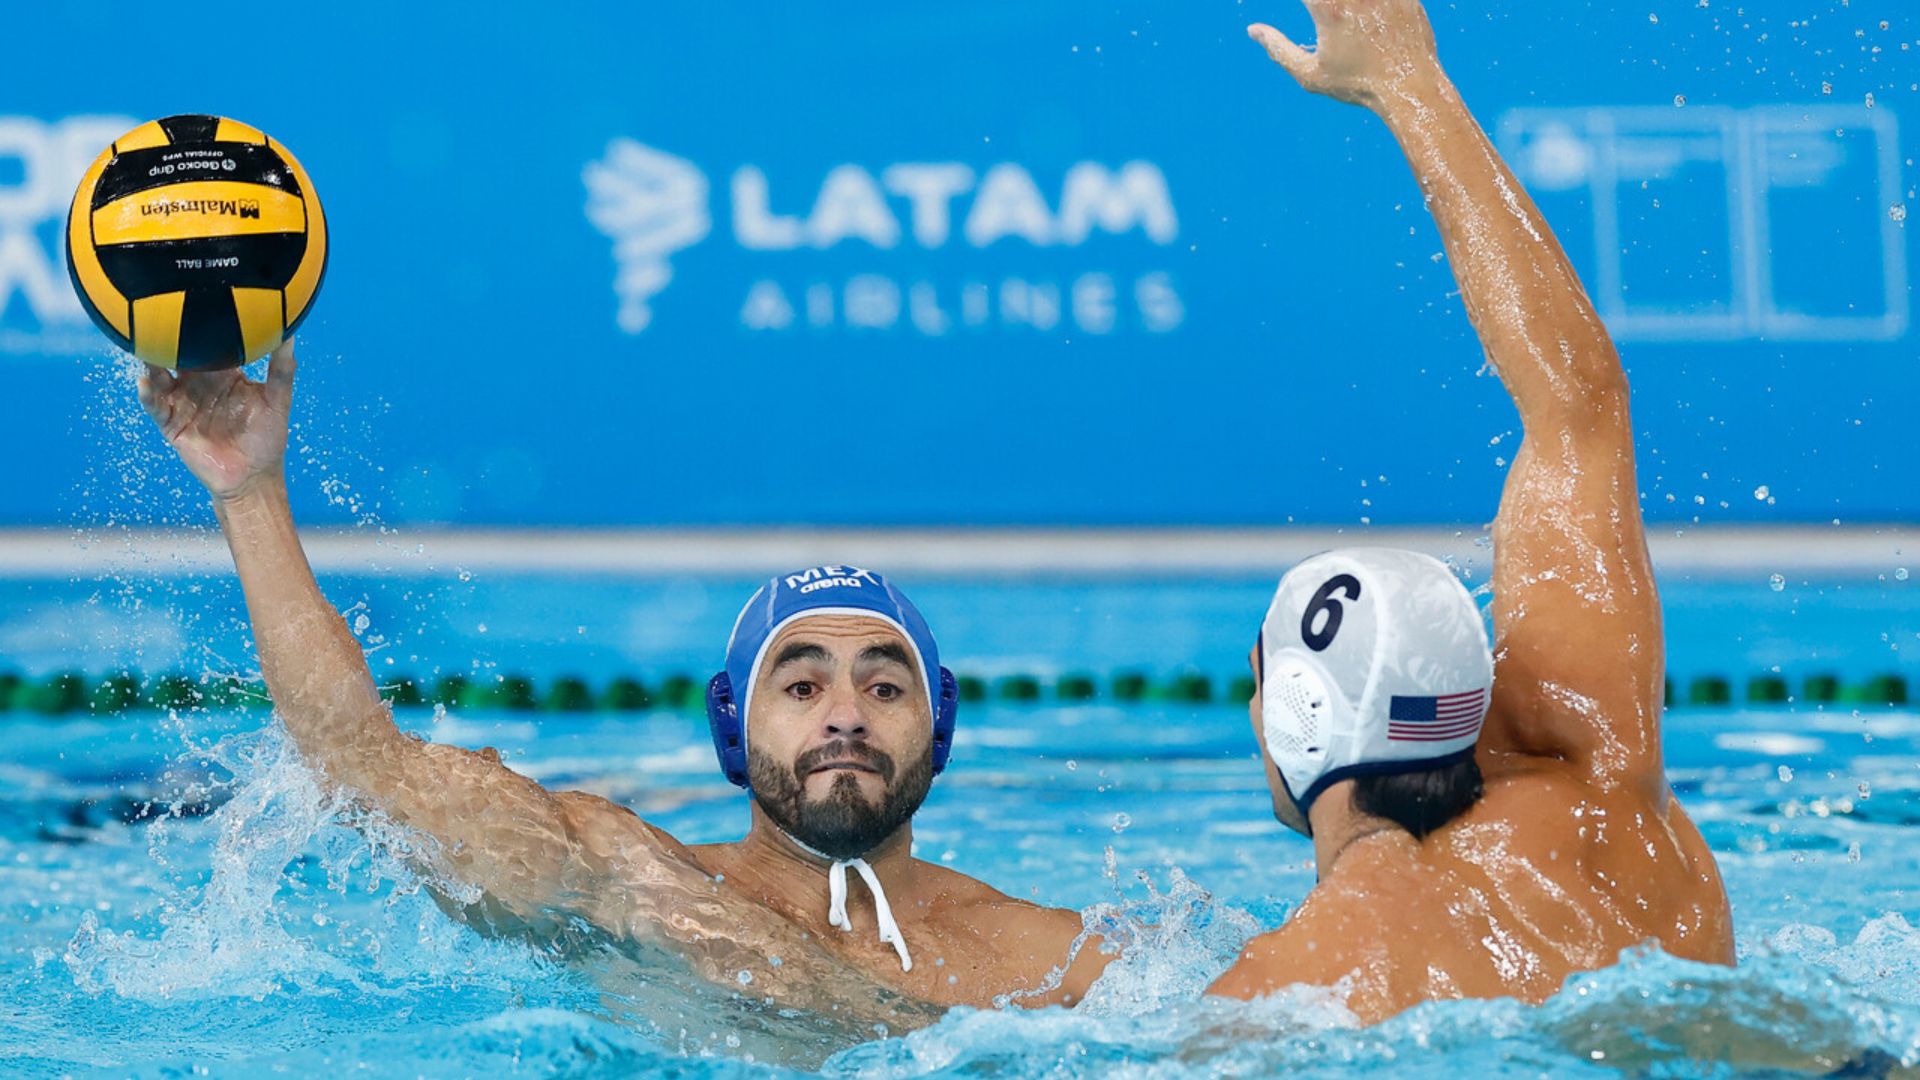 The United States starts with a dominant win in male Water Polo